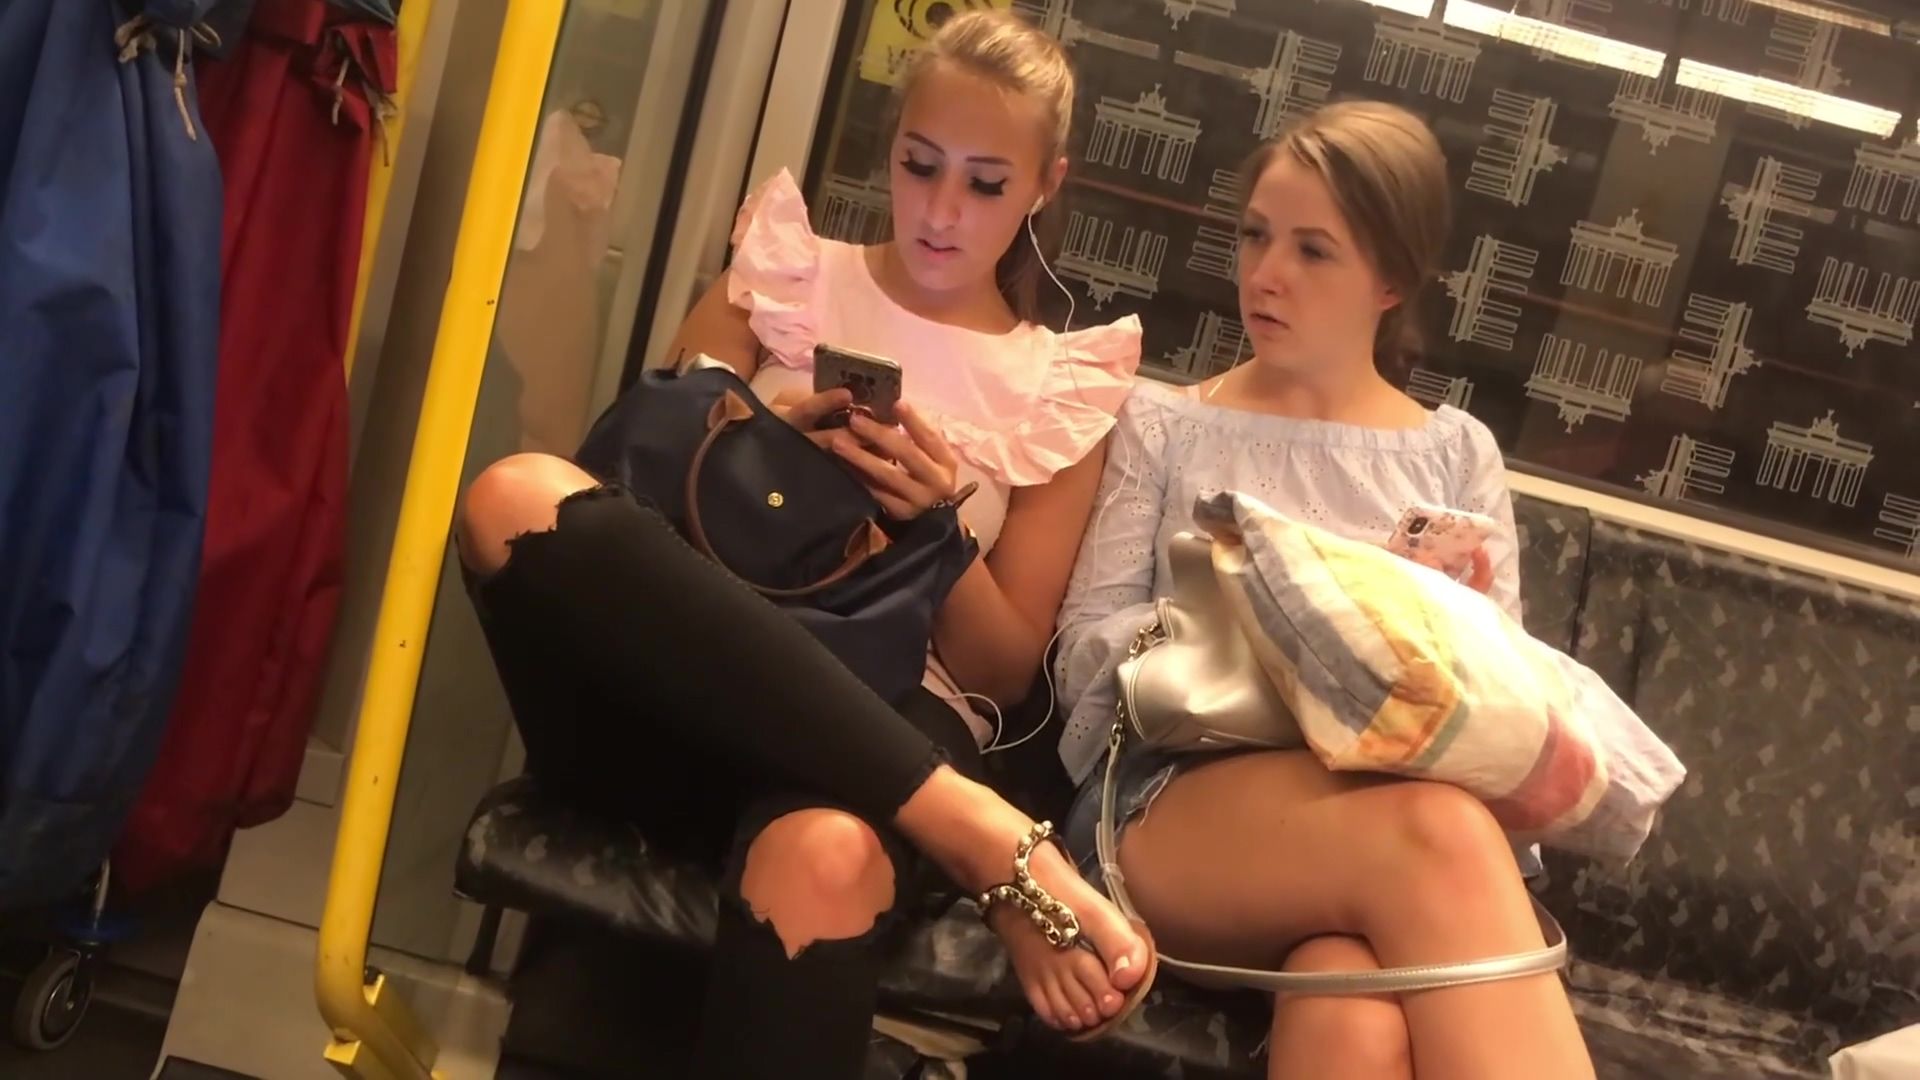 Stream Cute Amateur College Babes Caught On The Subway In Their Sexy Flip-flops SexScat - 1